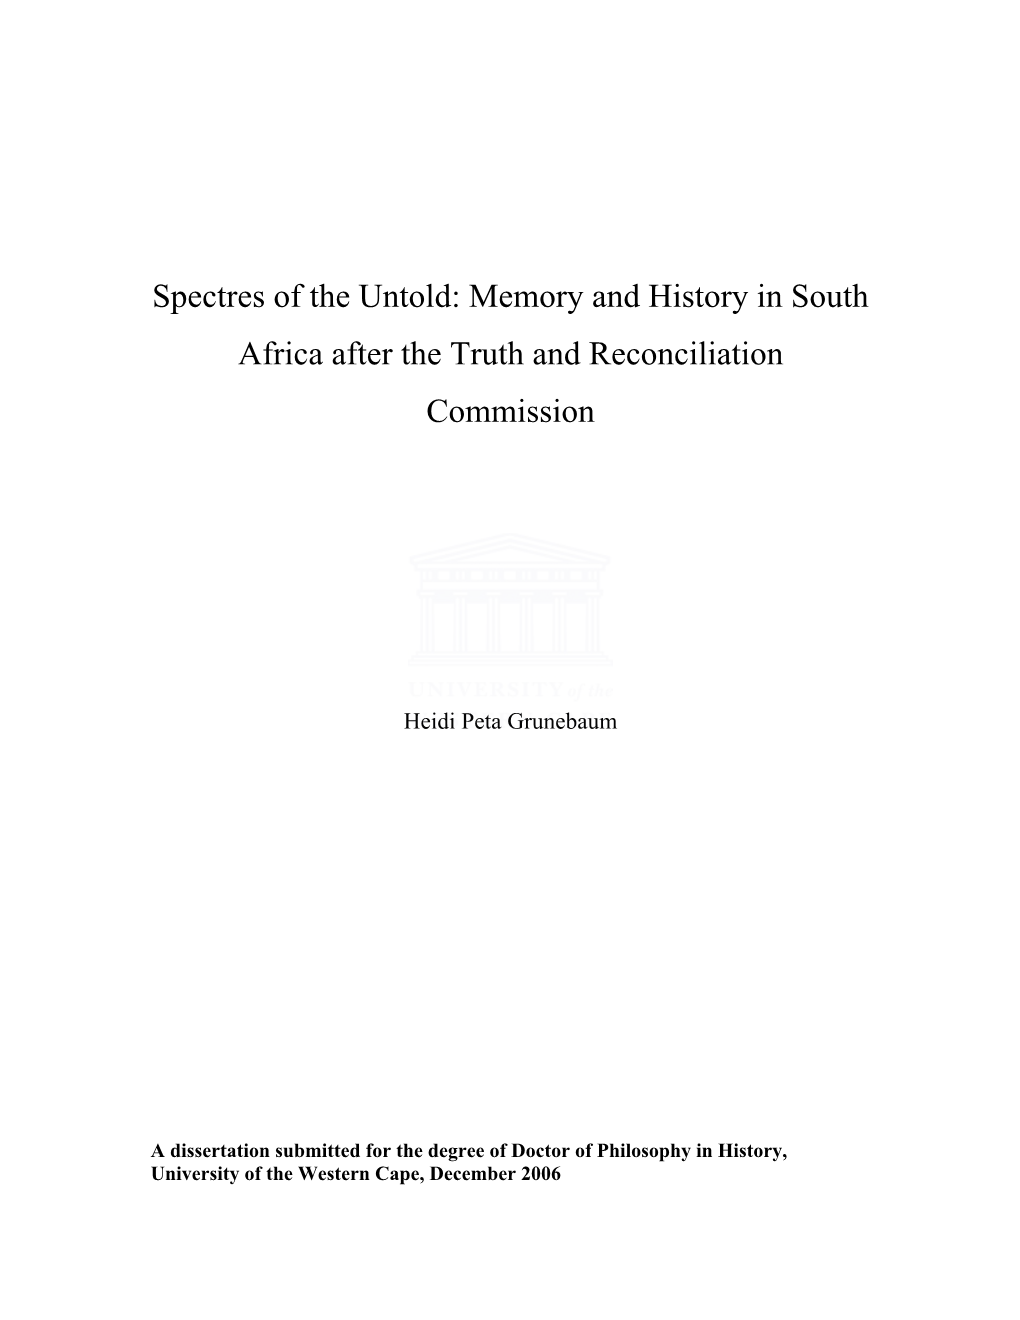 Memory and History in South Africa After the Truth and Reconciliation Commission